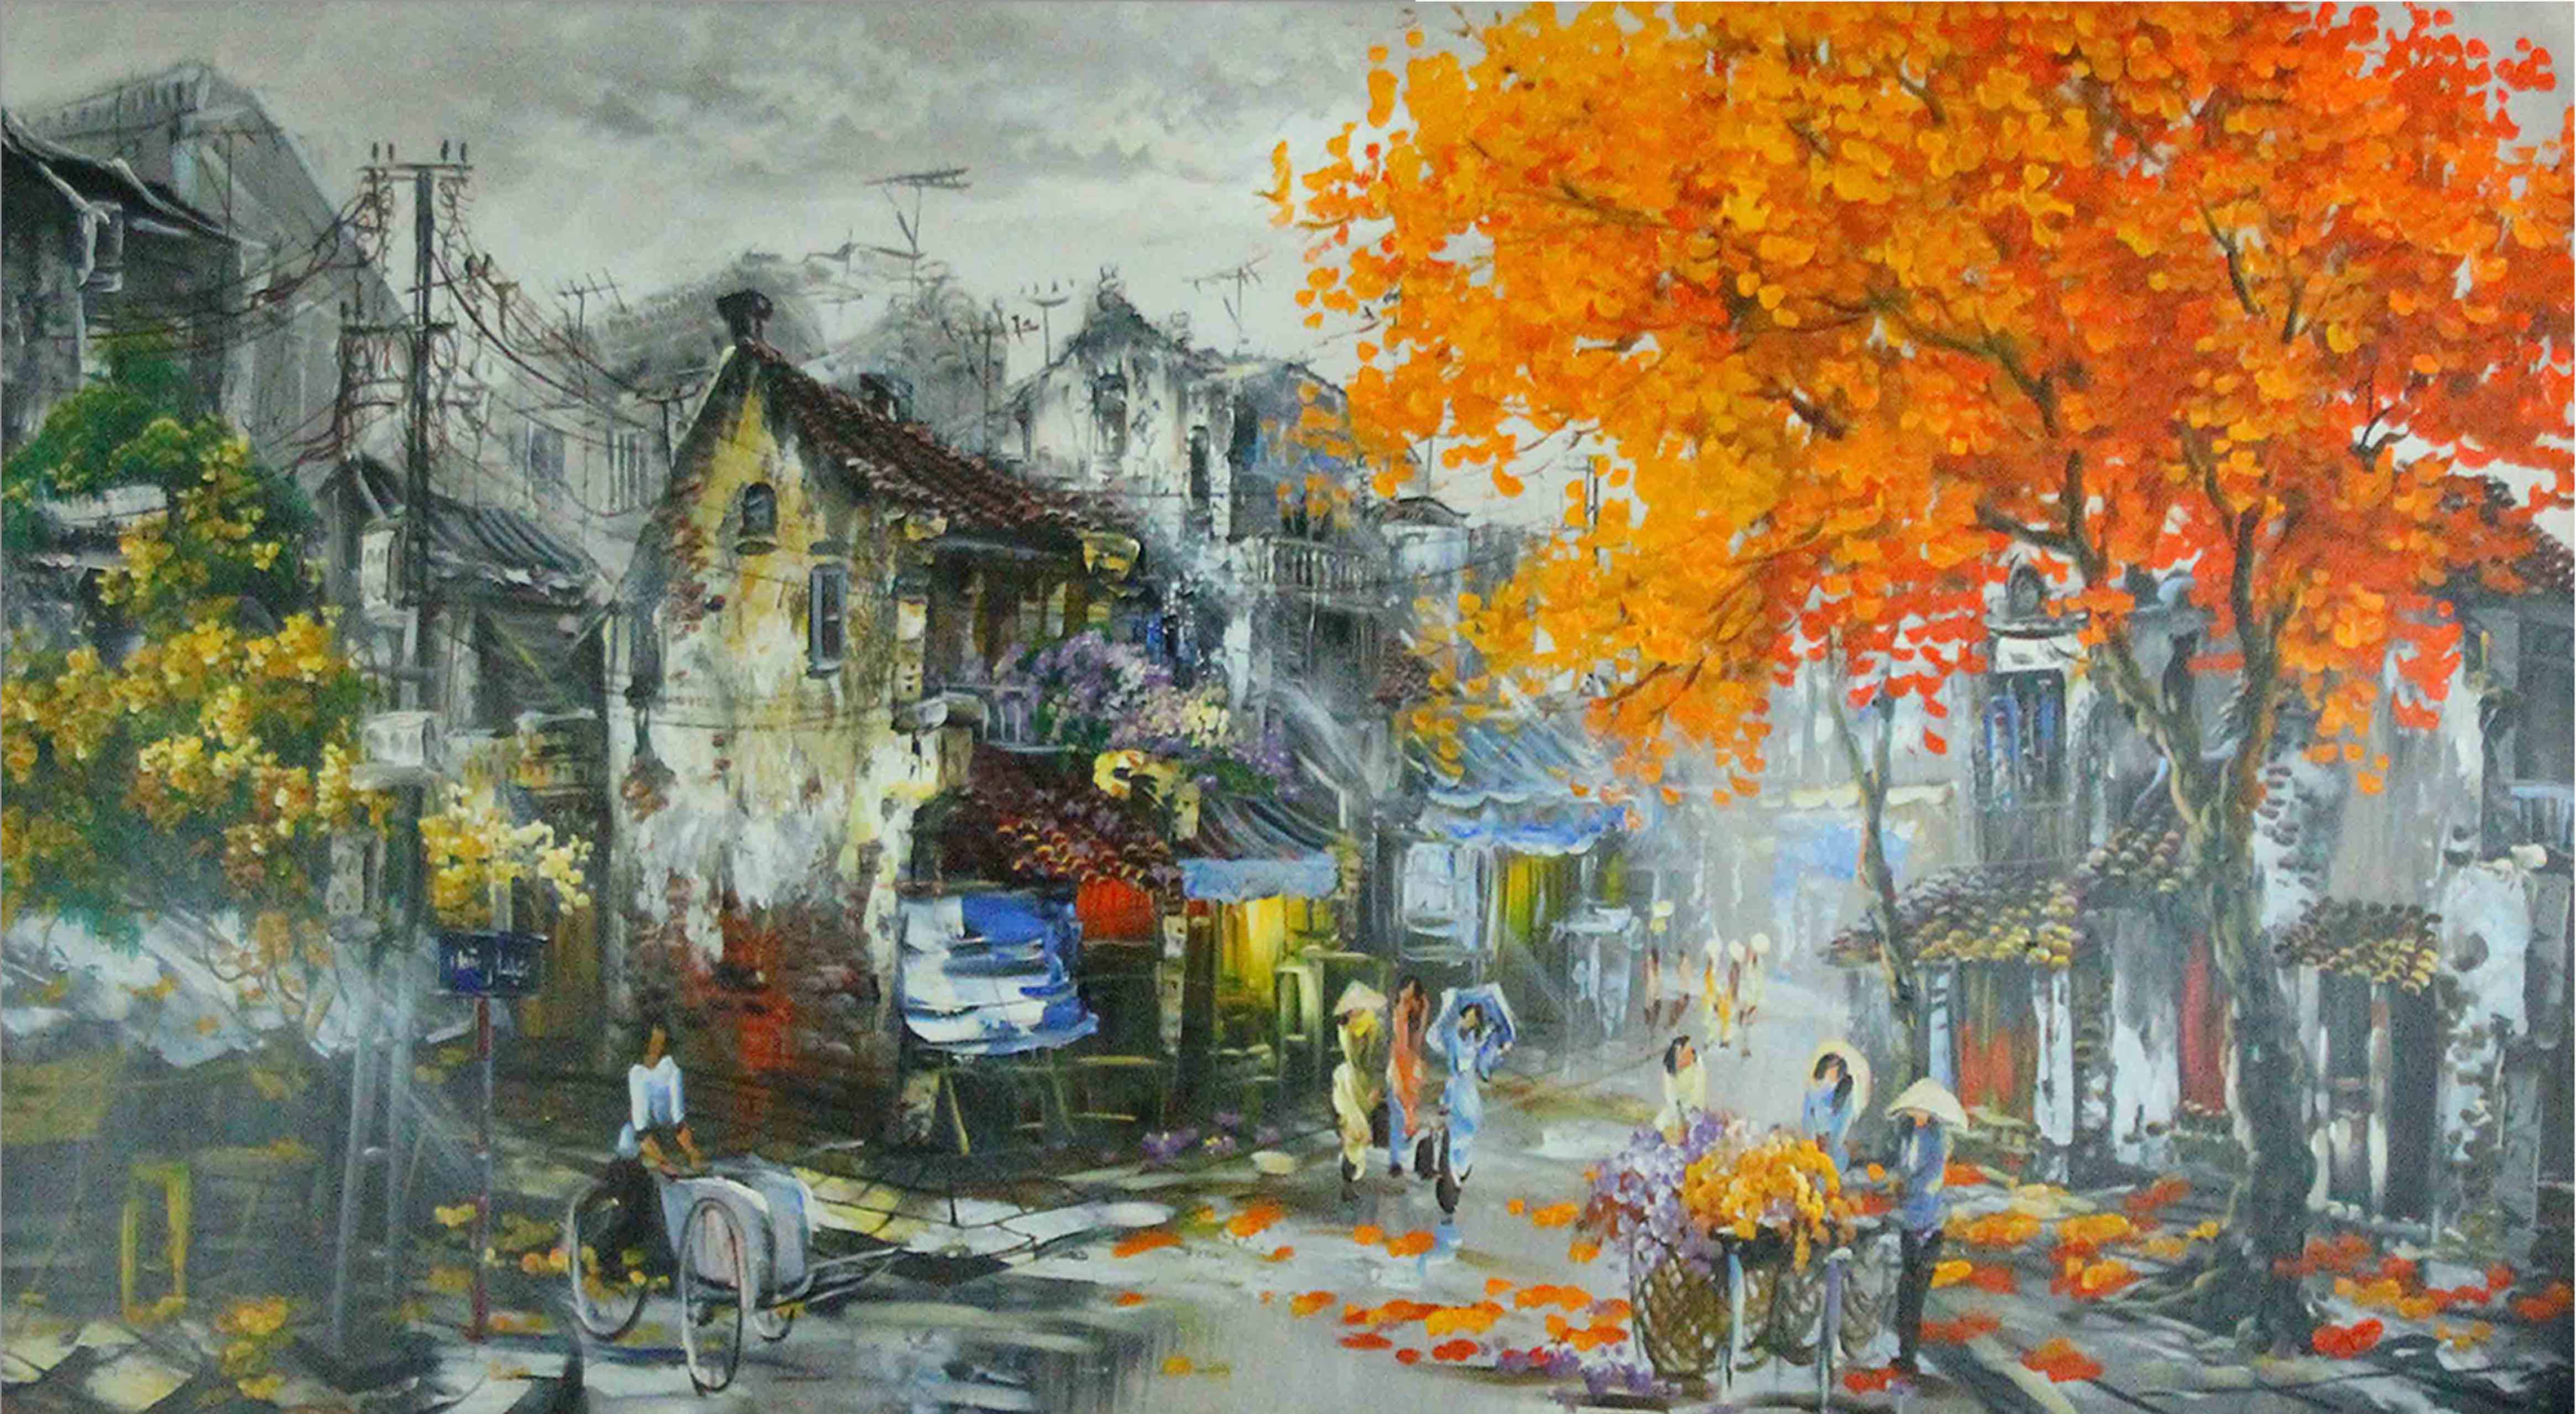 Oil painting of Old town - TSD36LHAR